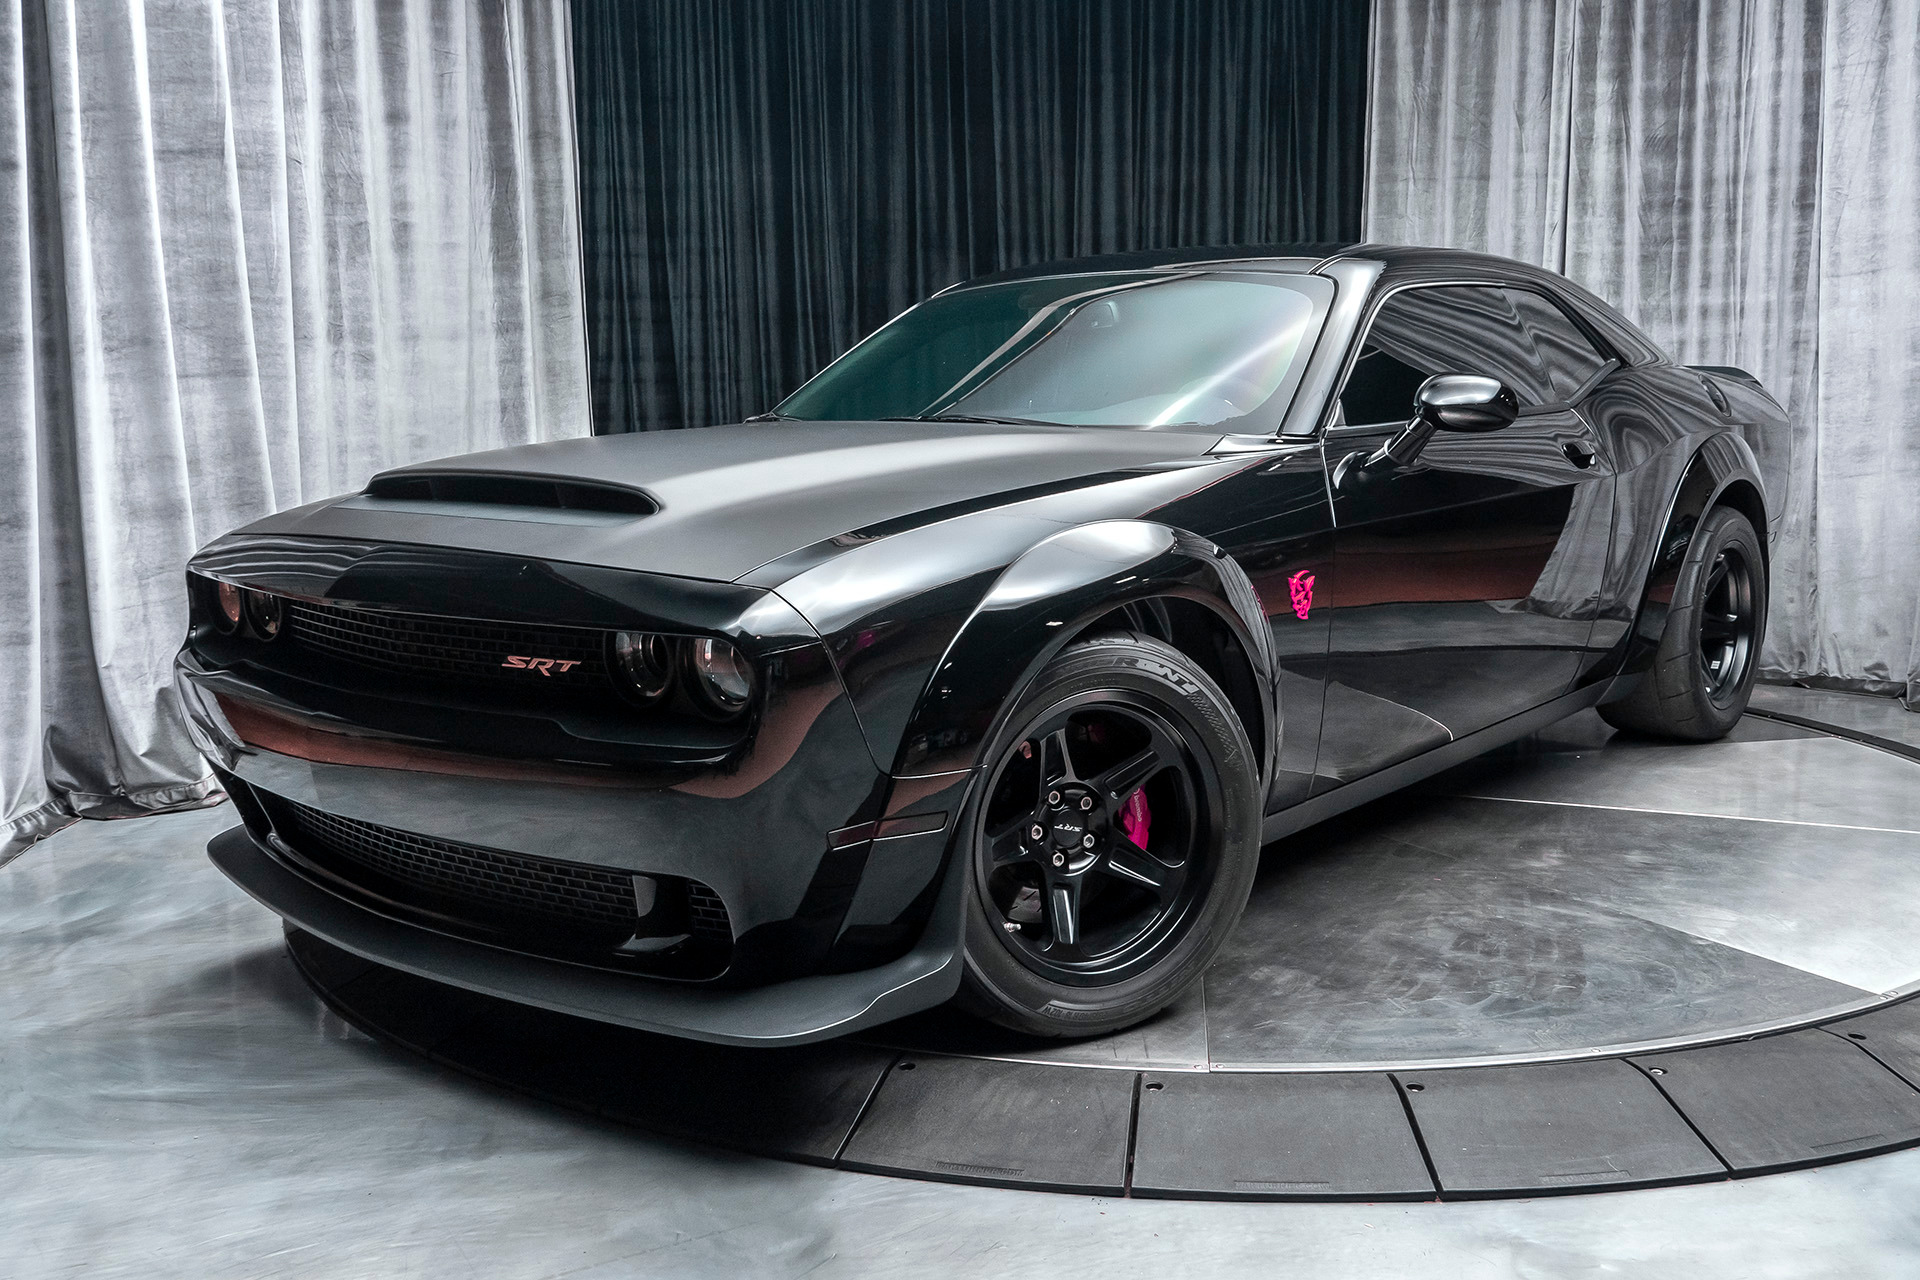 Used-2018-Dodge-Challenger-SRT-Demon-Coupe-Only-1978-Miles-Crate-Included